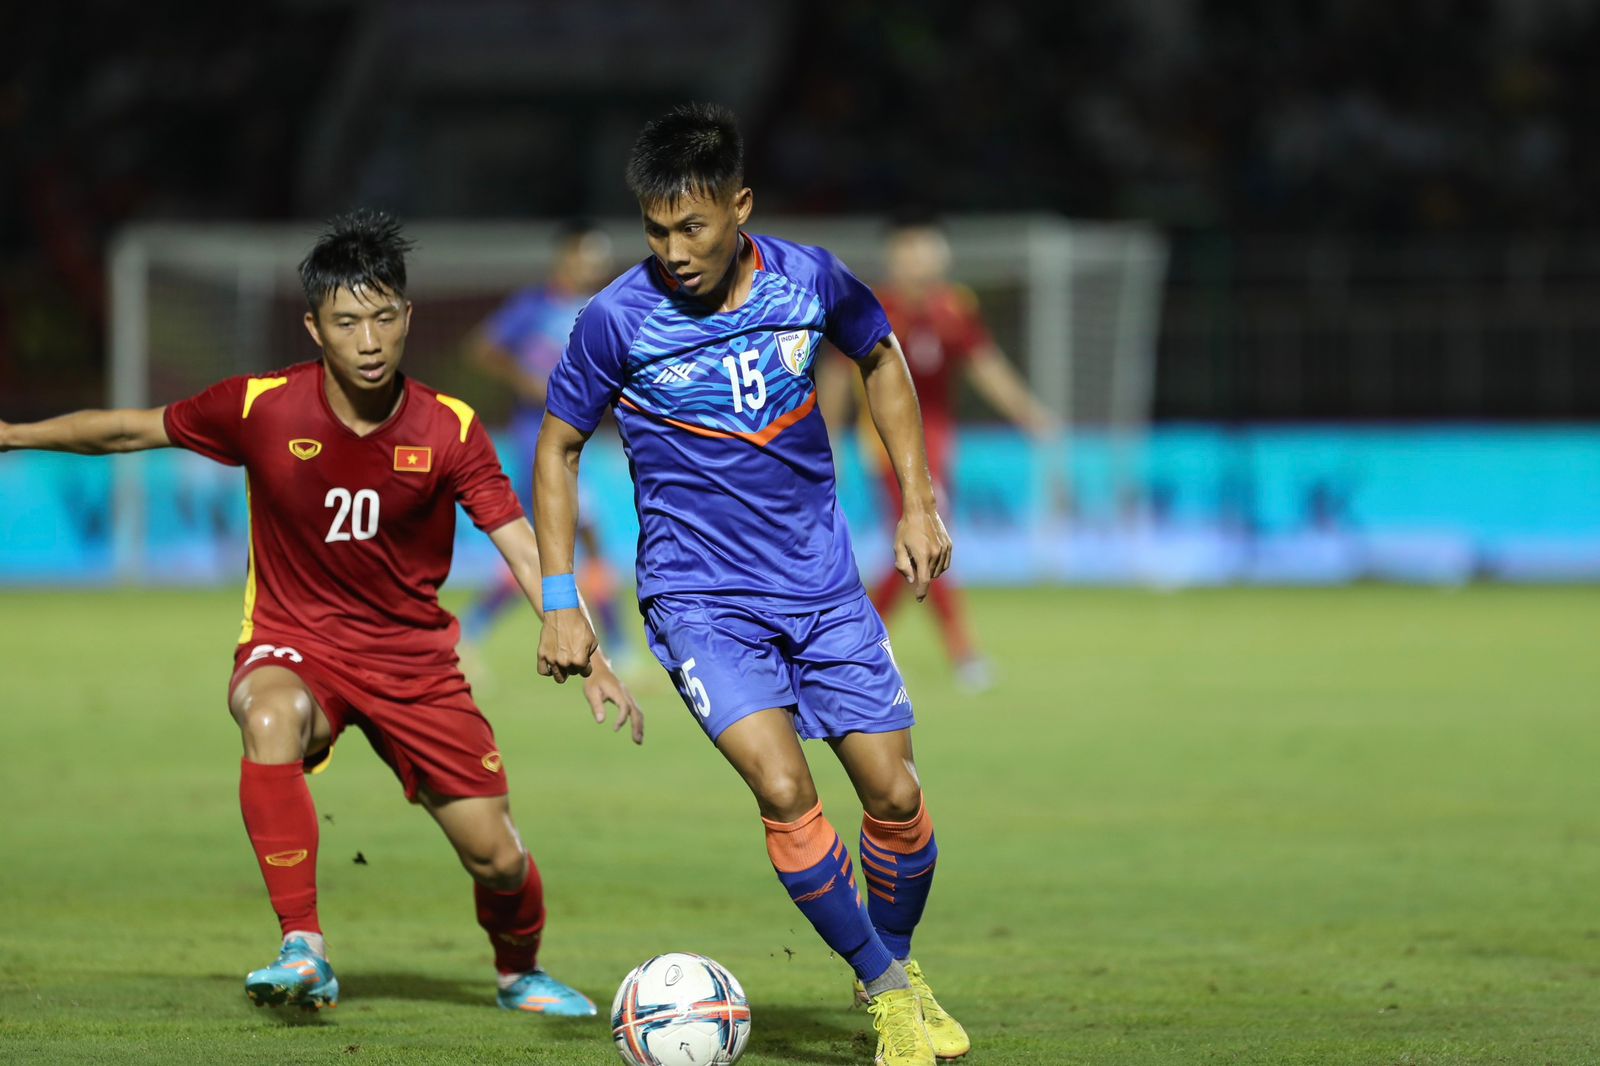 Indian Football Team: What went WRONG for the Blue Tigers and Igor Stimac against Vietnam and Singapore? Check Out